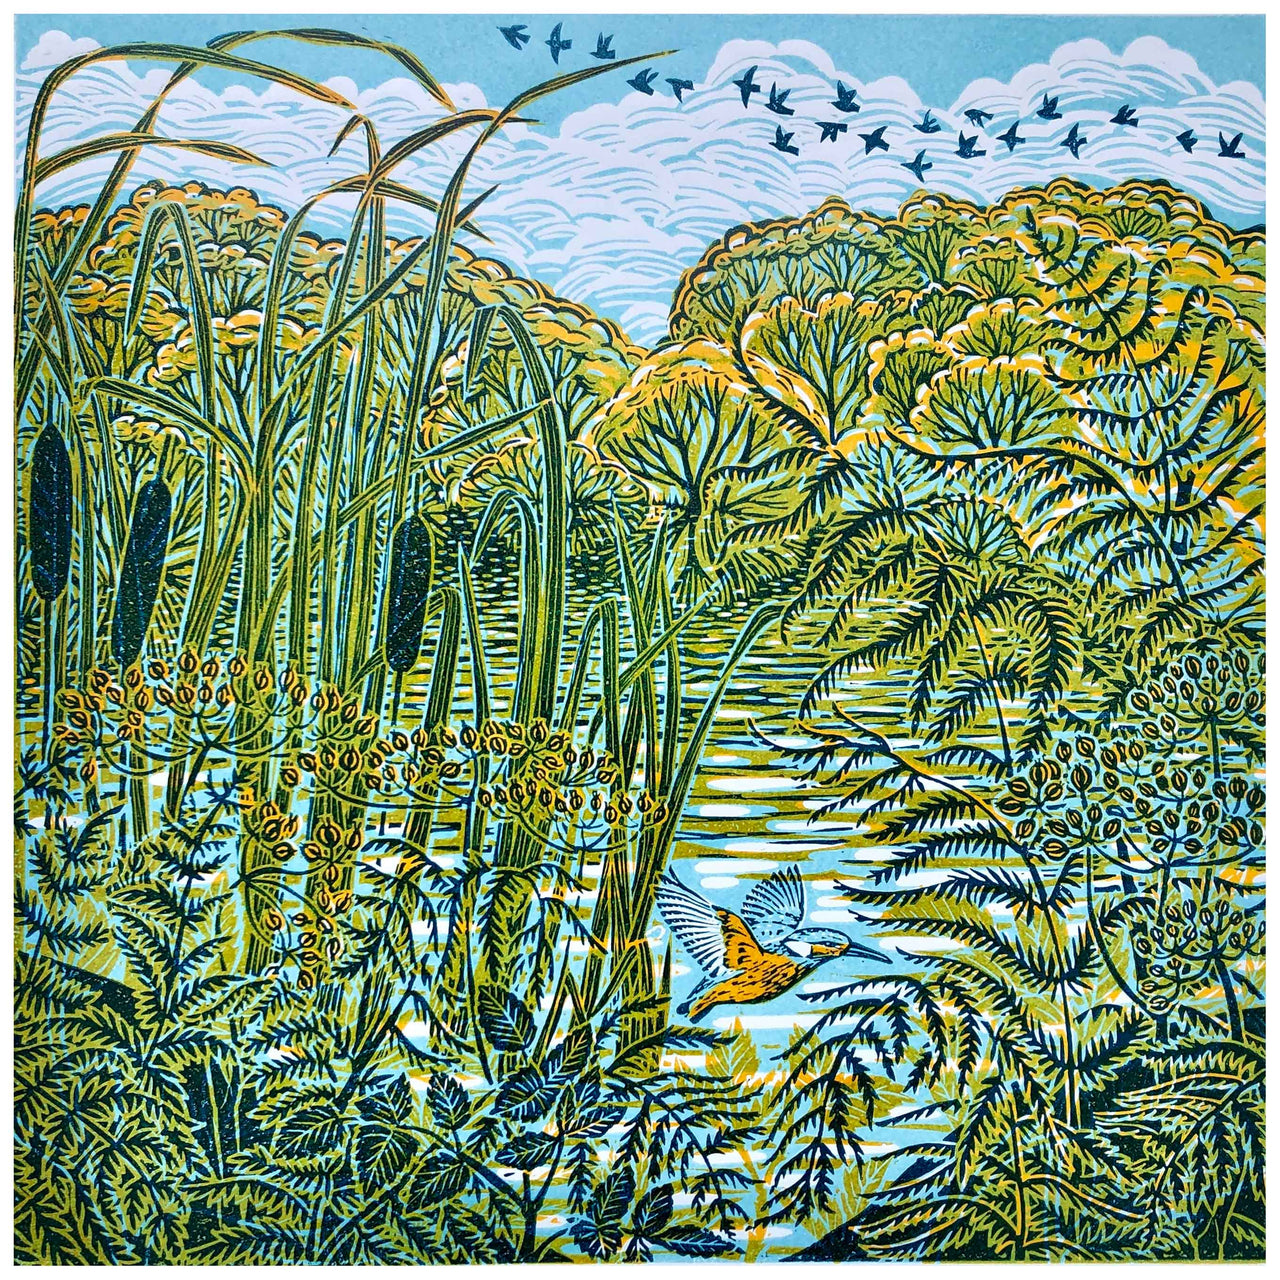 gilded blue limited edition lino print by Claire Armitage